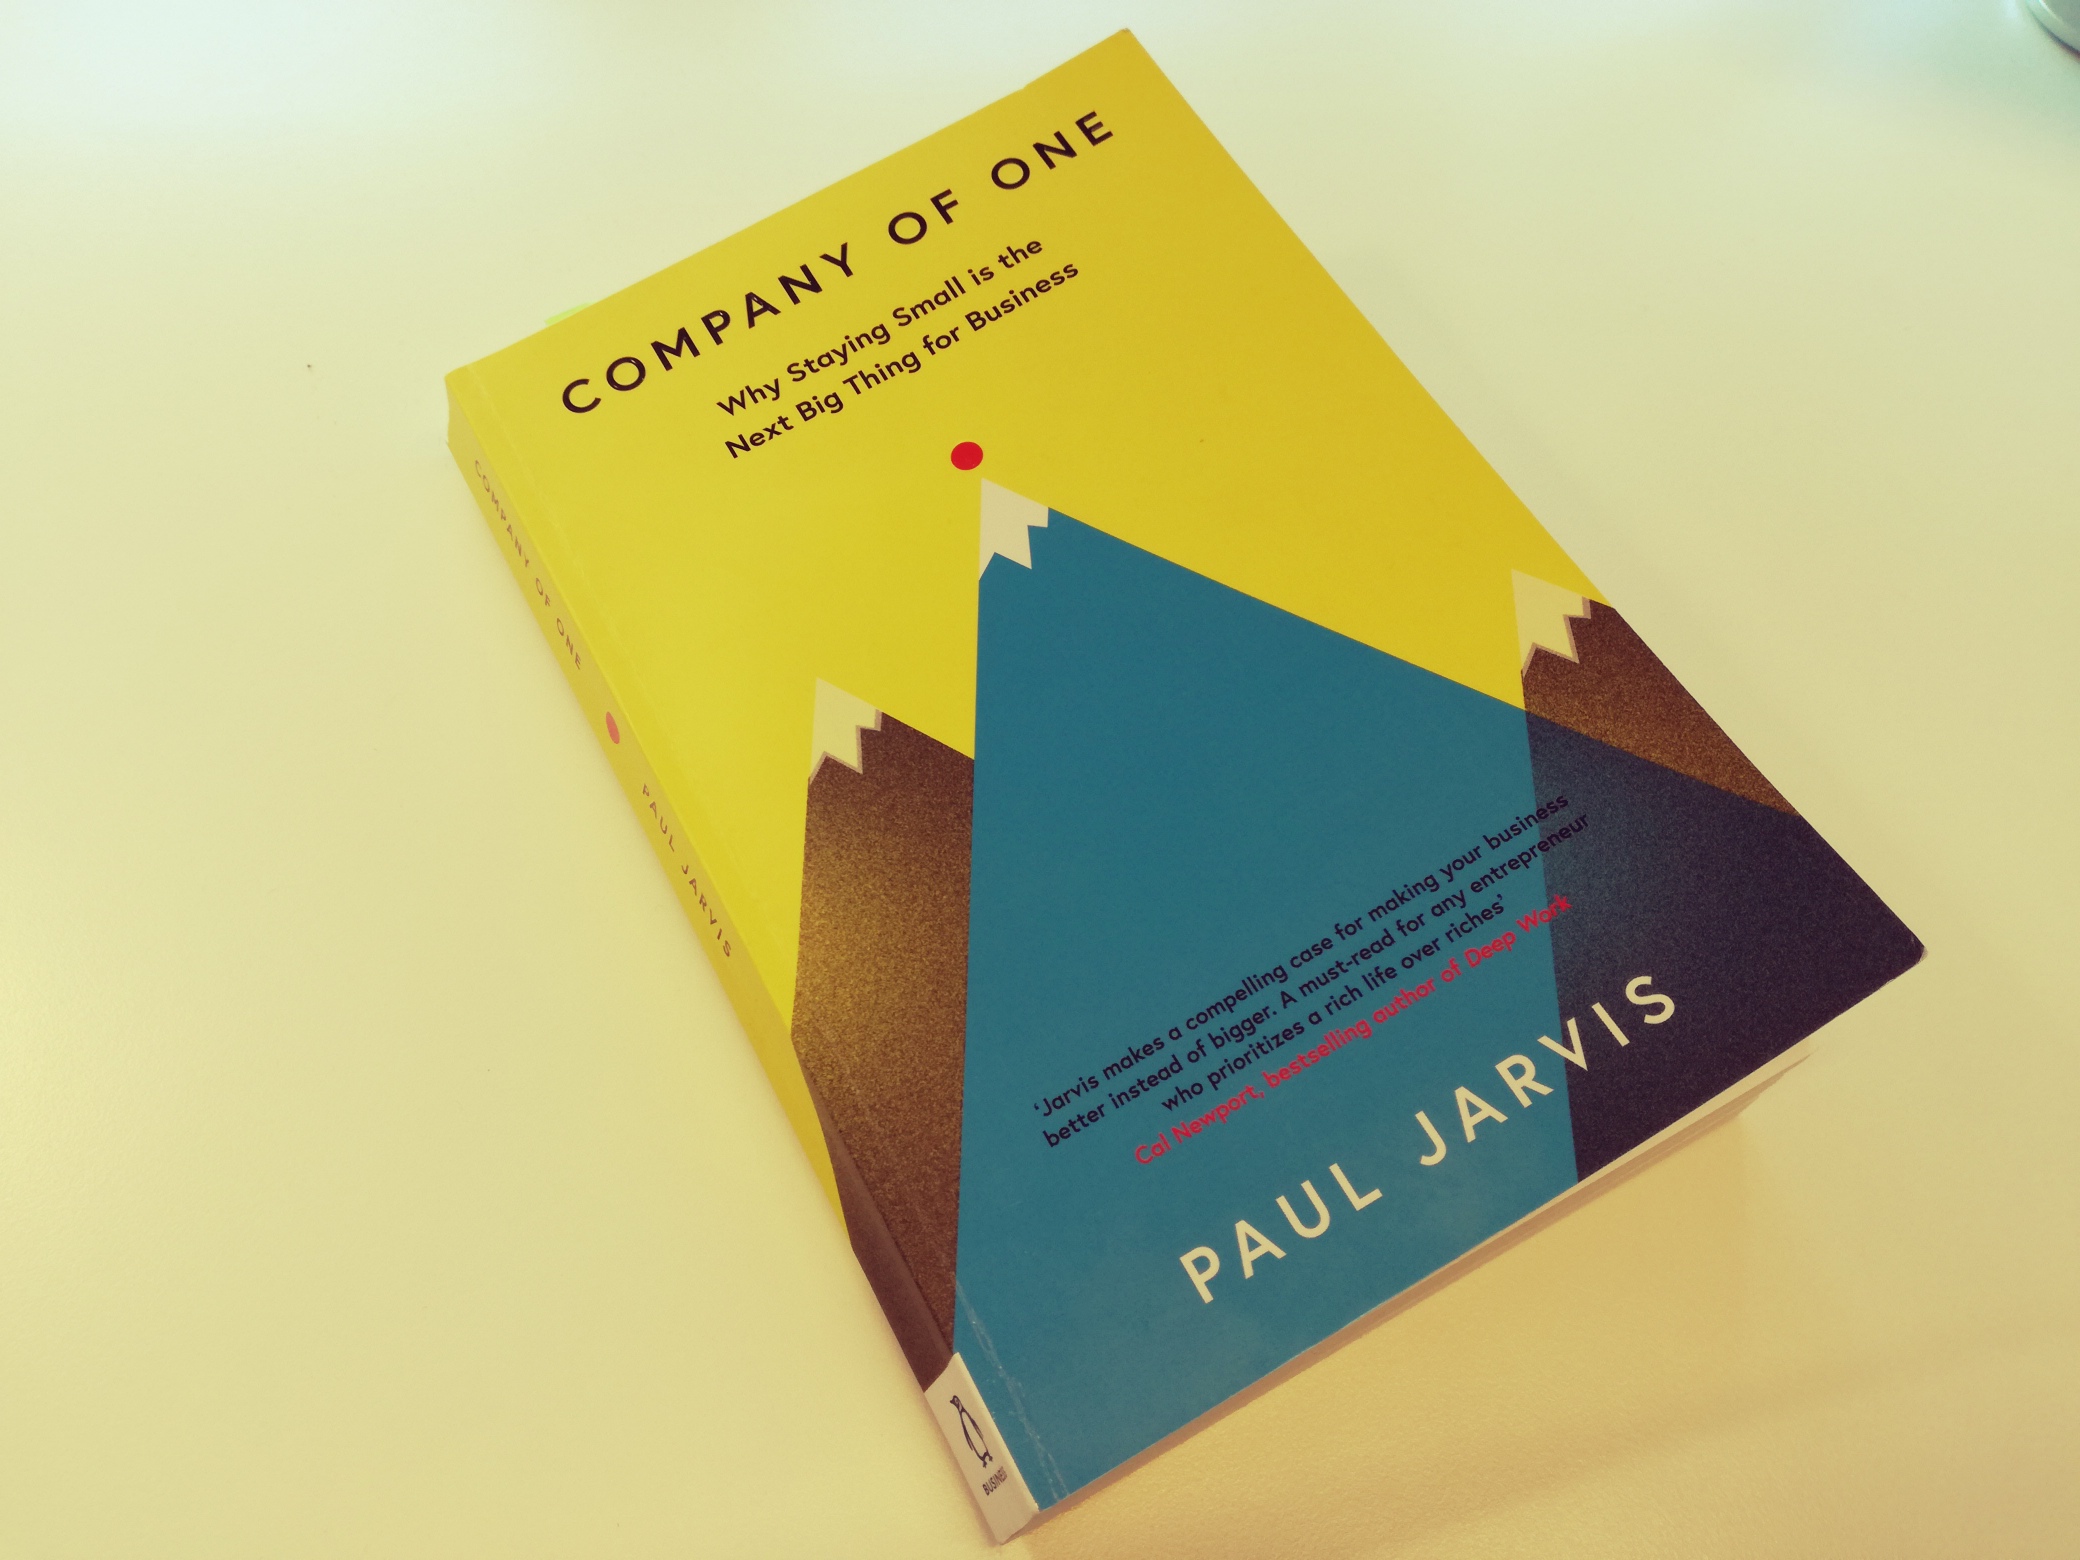 Company of One book review